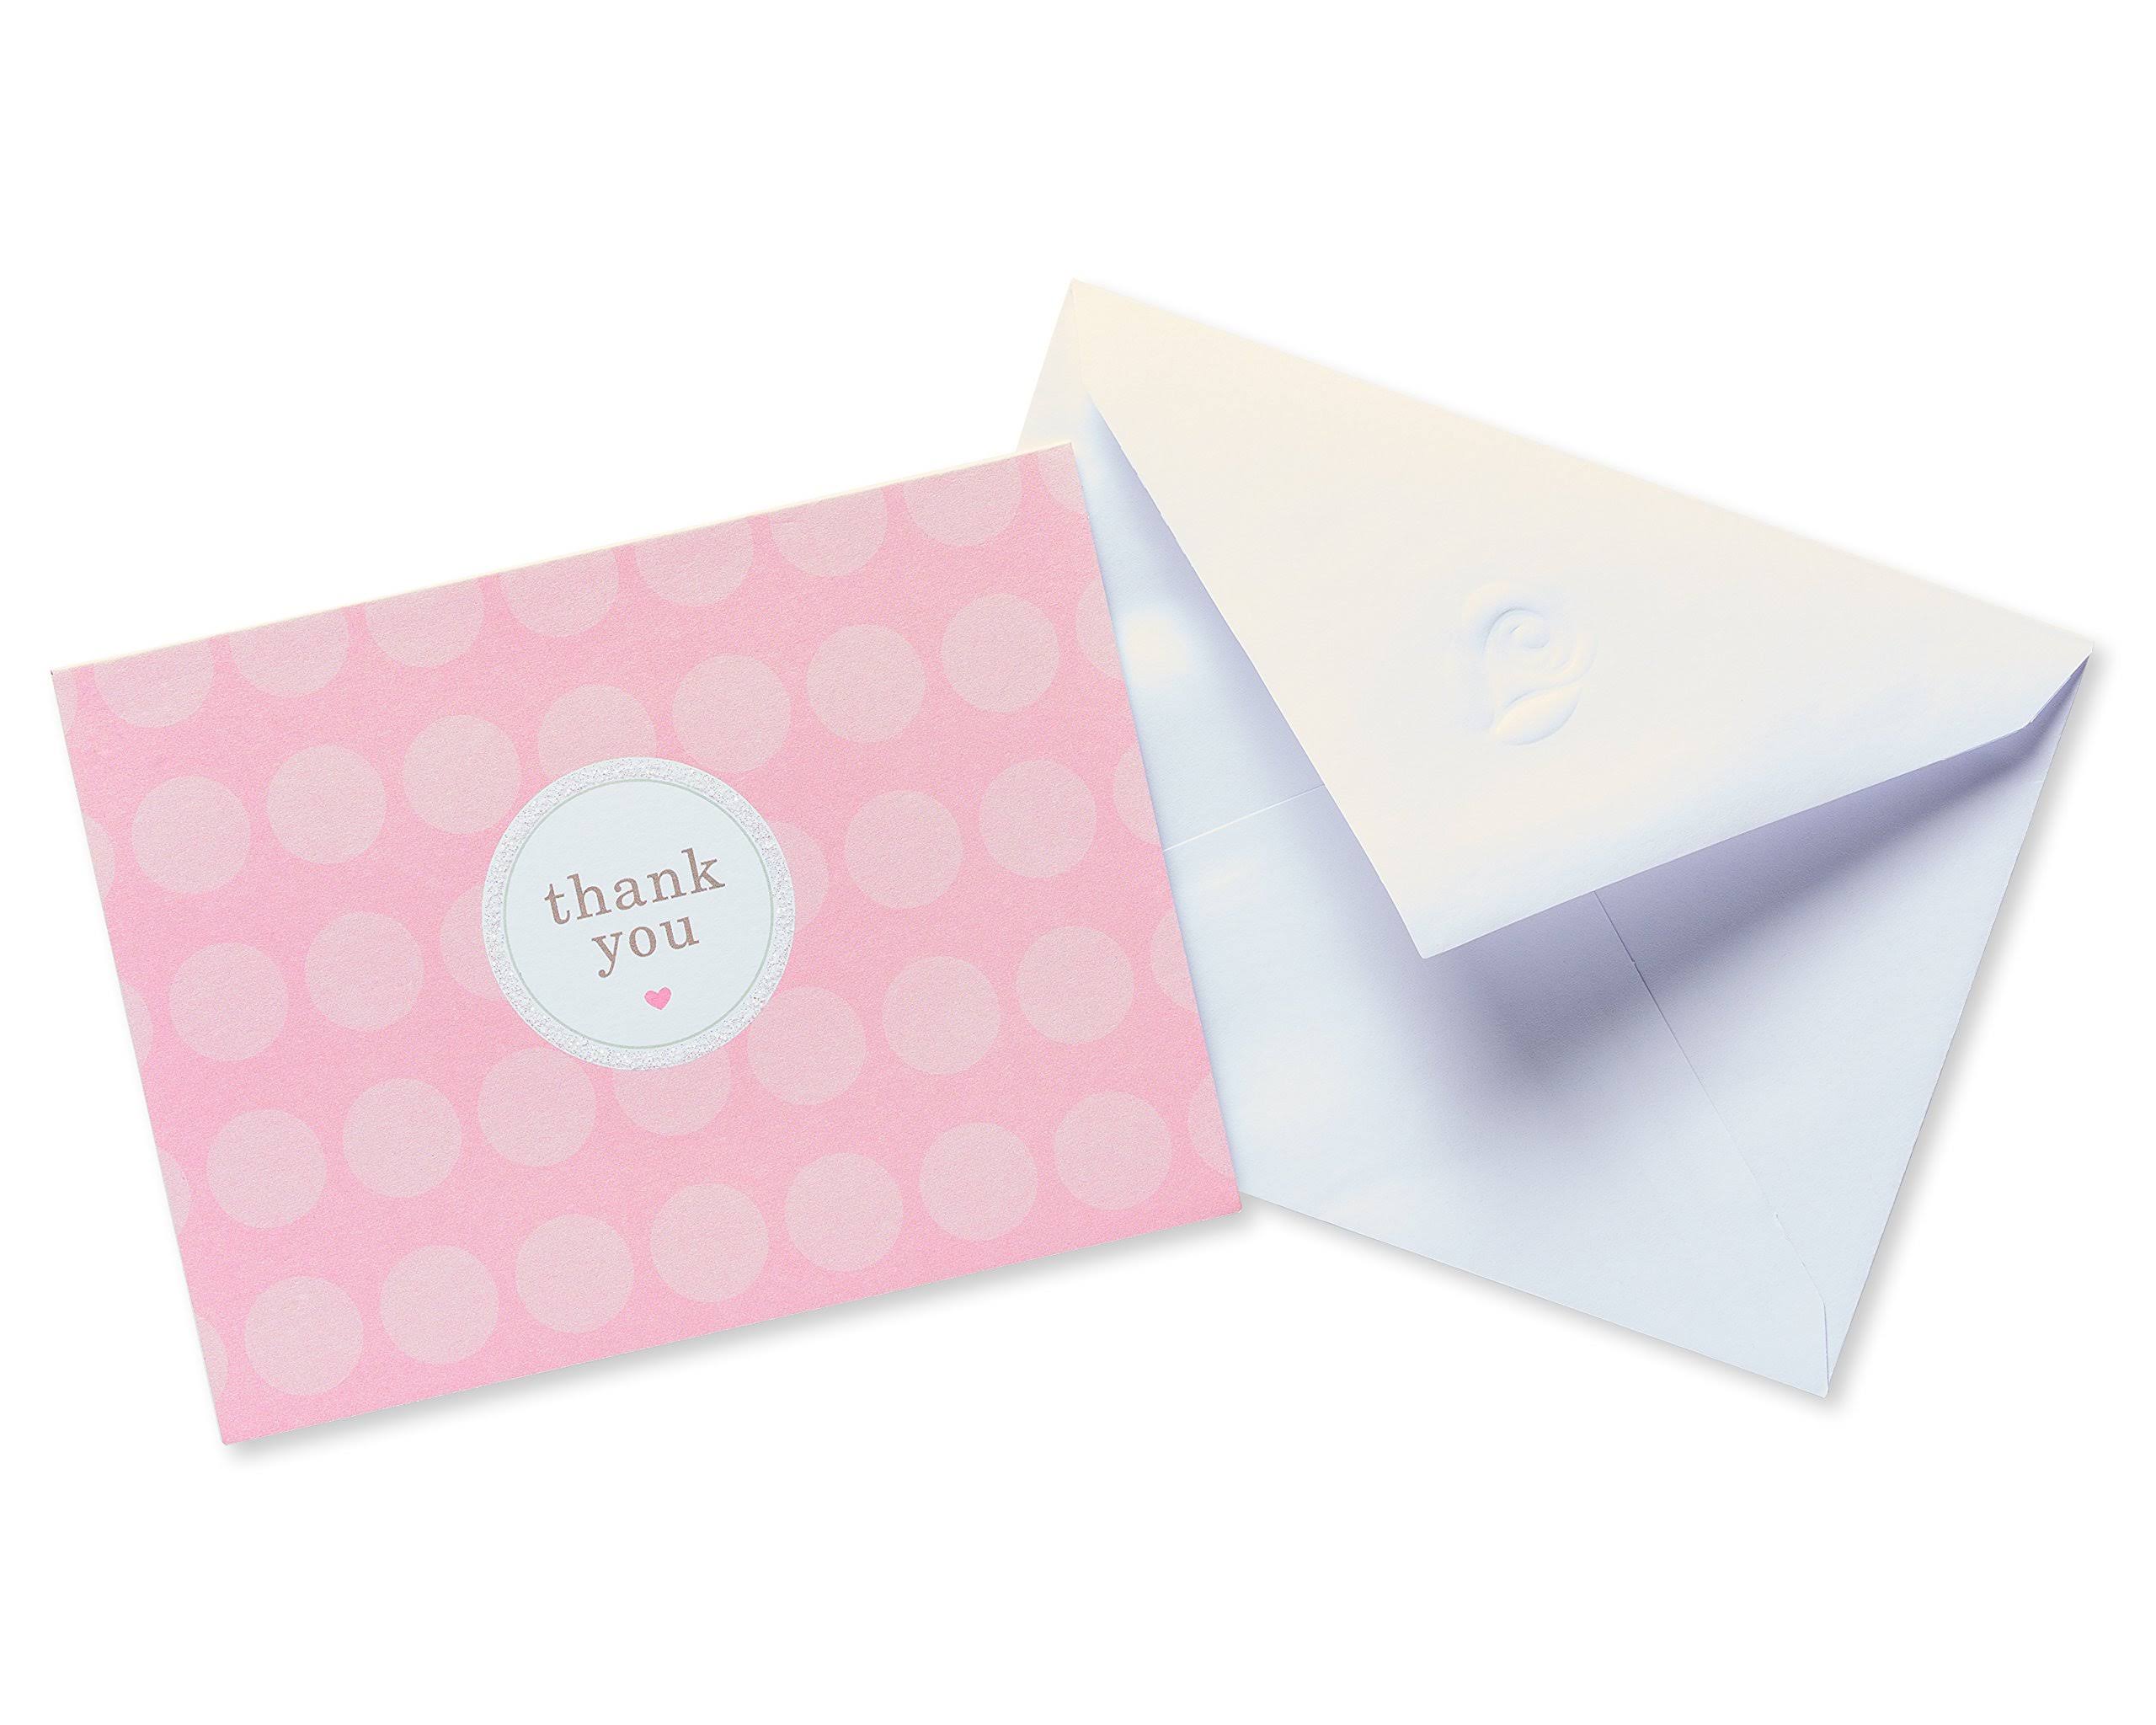 American Greetings Thank You Cards with Envelopes, Pink Dots (20-Count)